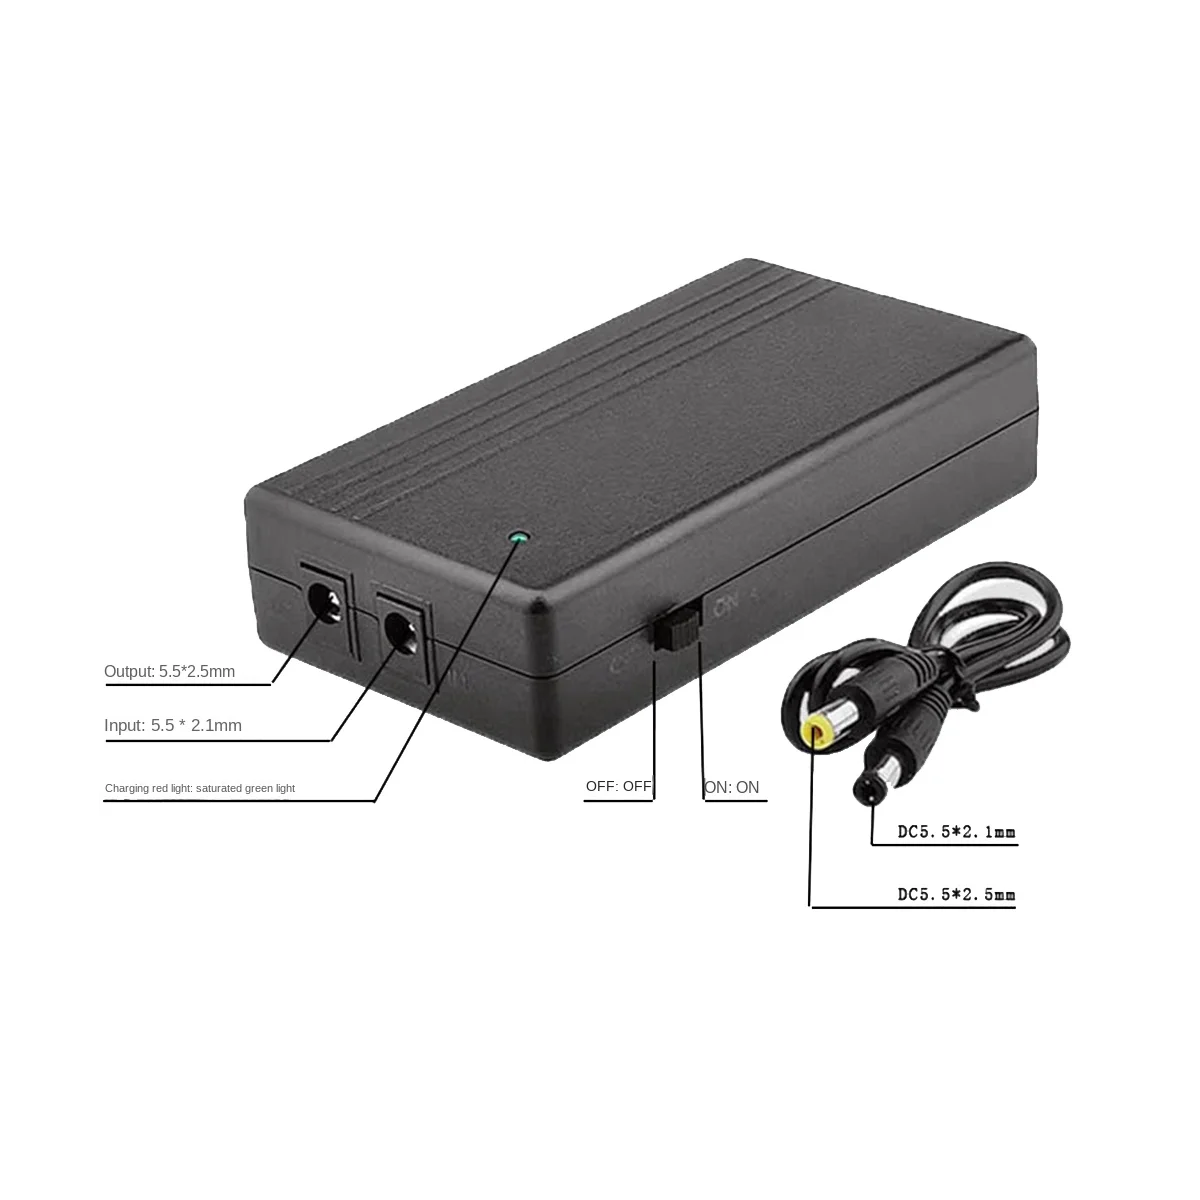 

5V 2A Uninterruptible Power Supply Mini UPS 4000MAh Battery Backup for CCTV&WiFi Router Emergency Supply